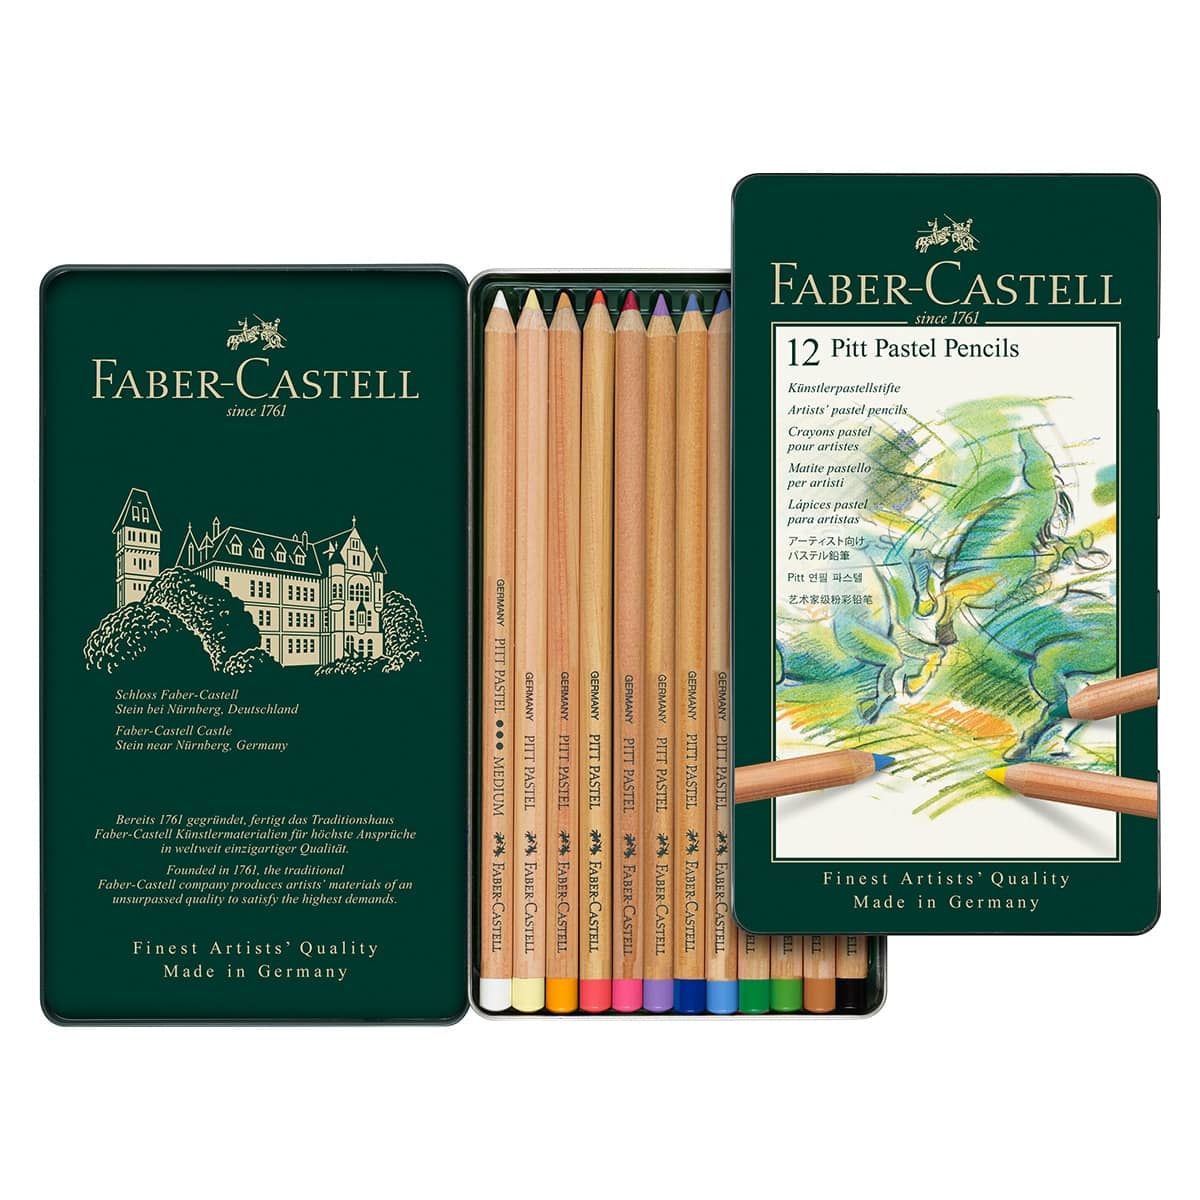  Faber-Castel Pitt Pastell Colouring Pencil Set of 60